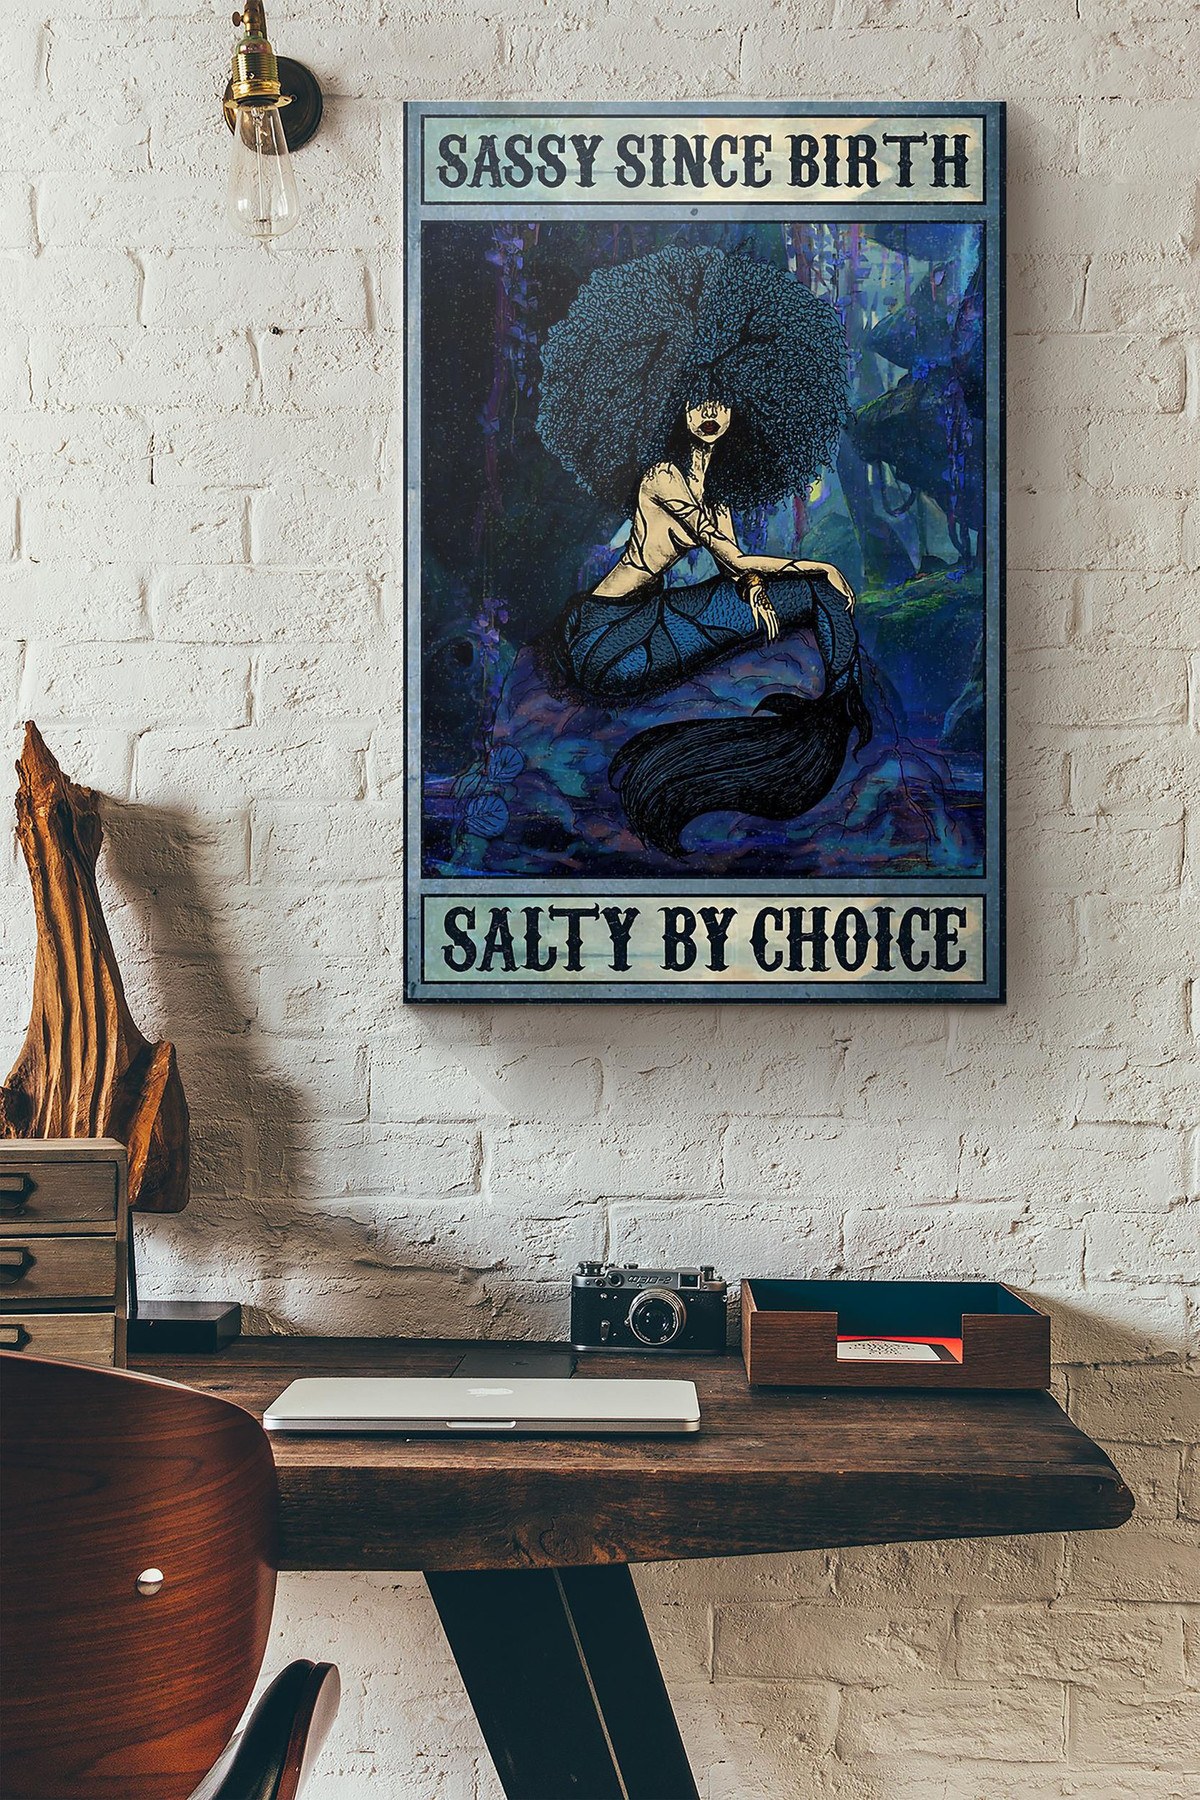 Afro Mermaid Sassy Since Birth Salty By Choice Canvas Painting Ideas, Canvas Hanging Prints, Gift Idea Framed Prints, Canvas Paintings Wrapped Canvas 8x10